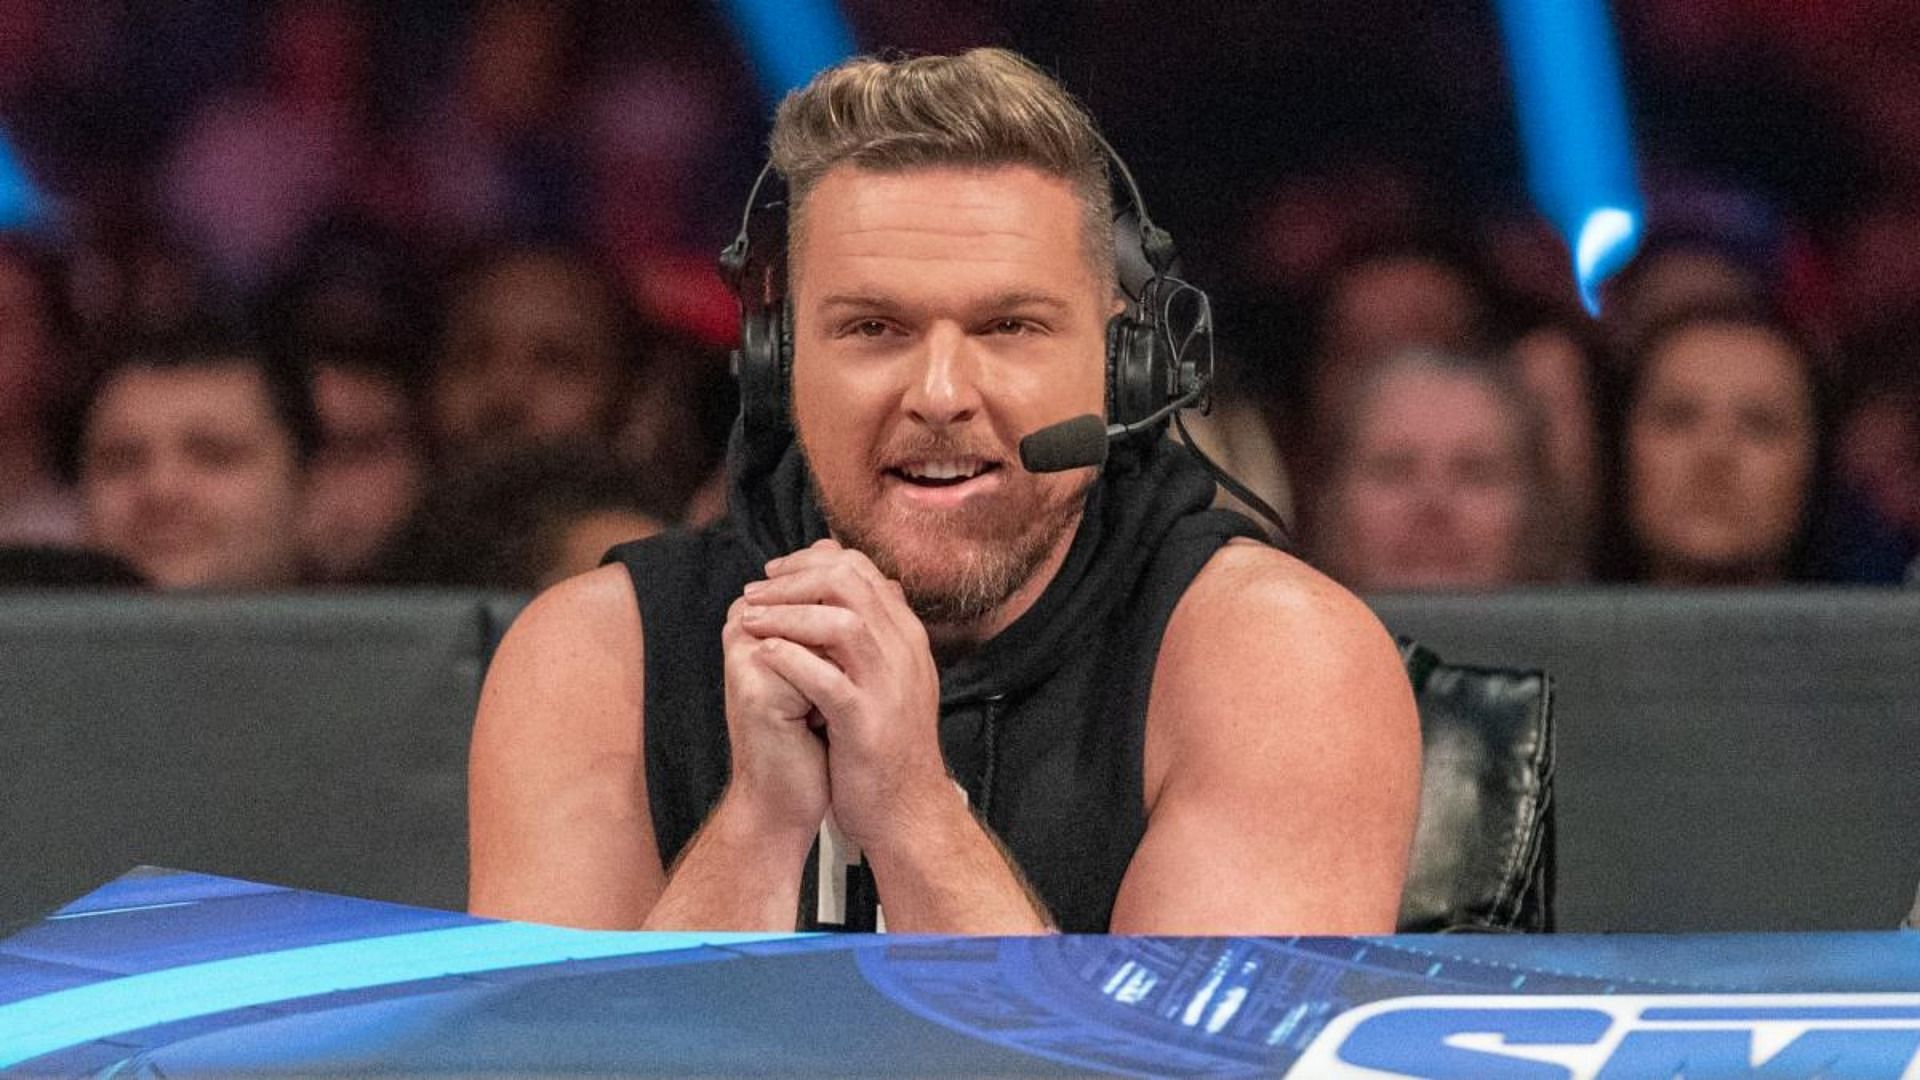 Pat McAfee has undoubtedly made WWE SmackDown interesting.